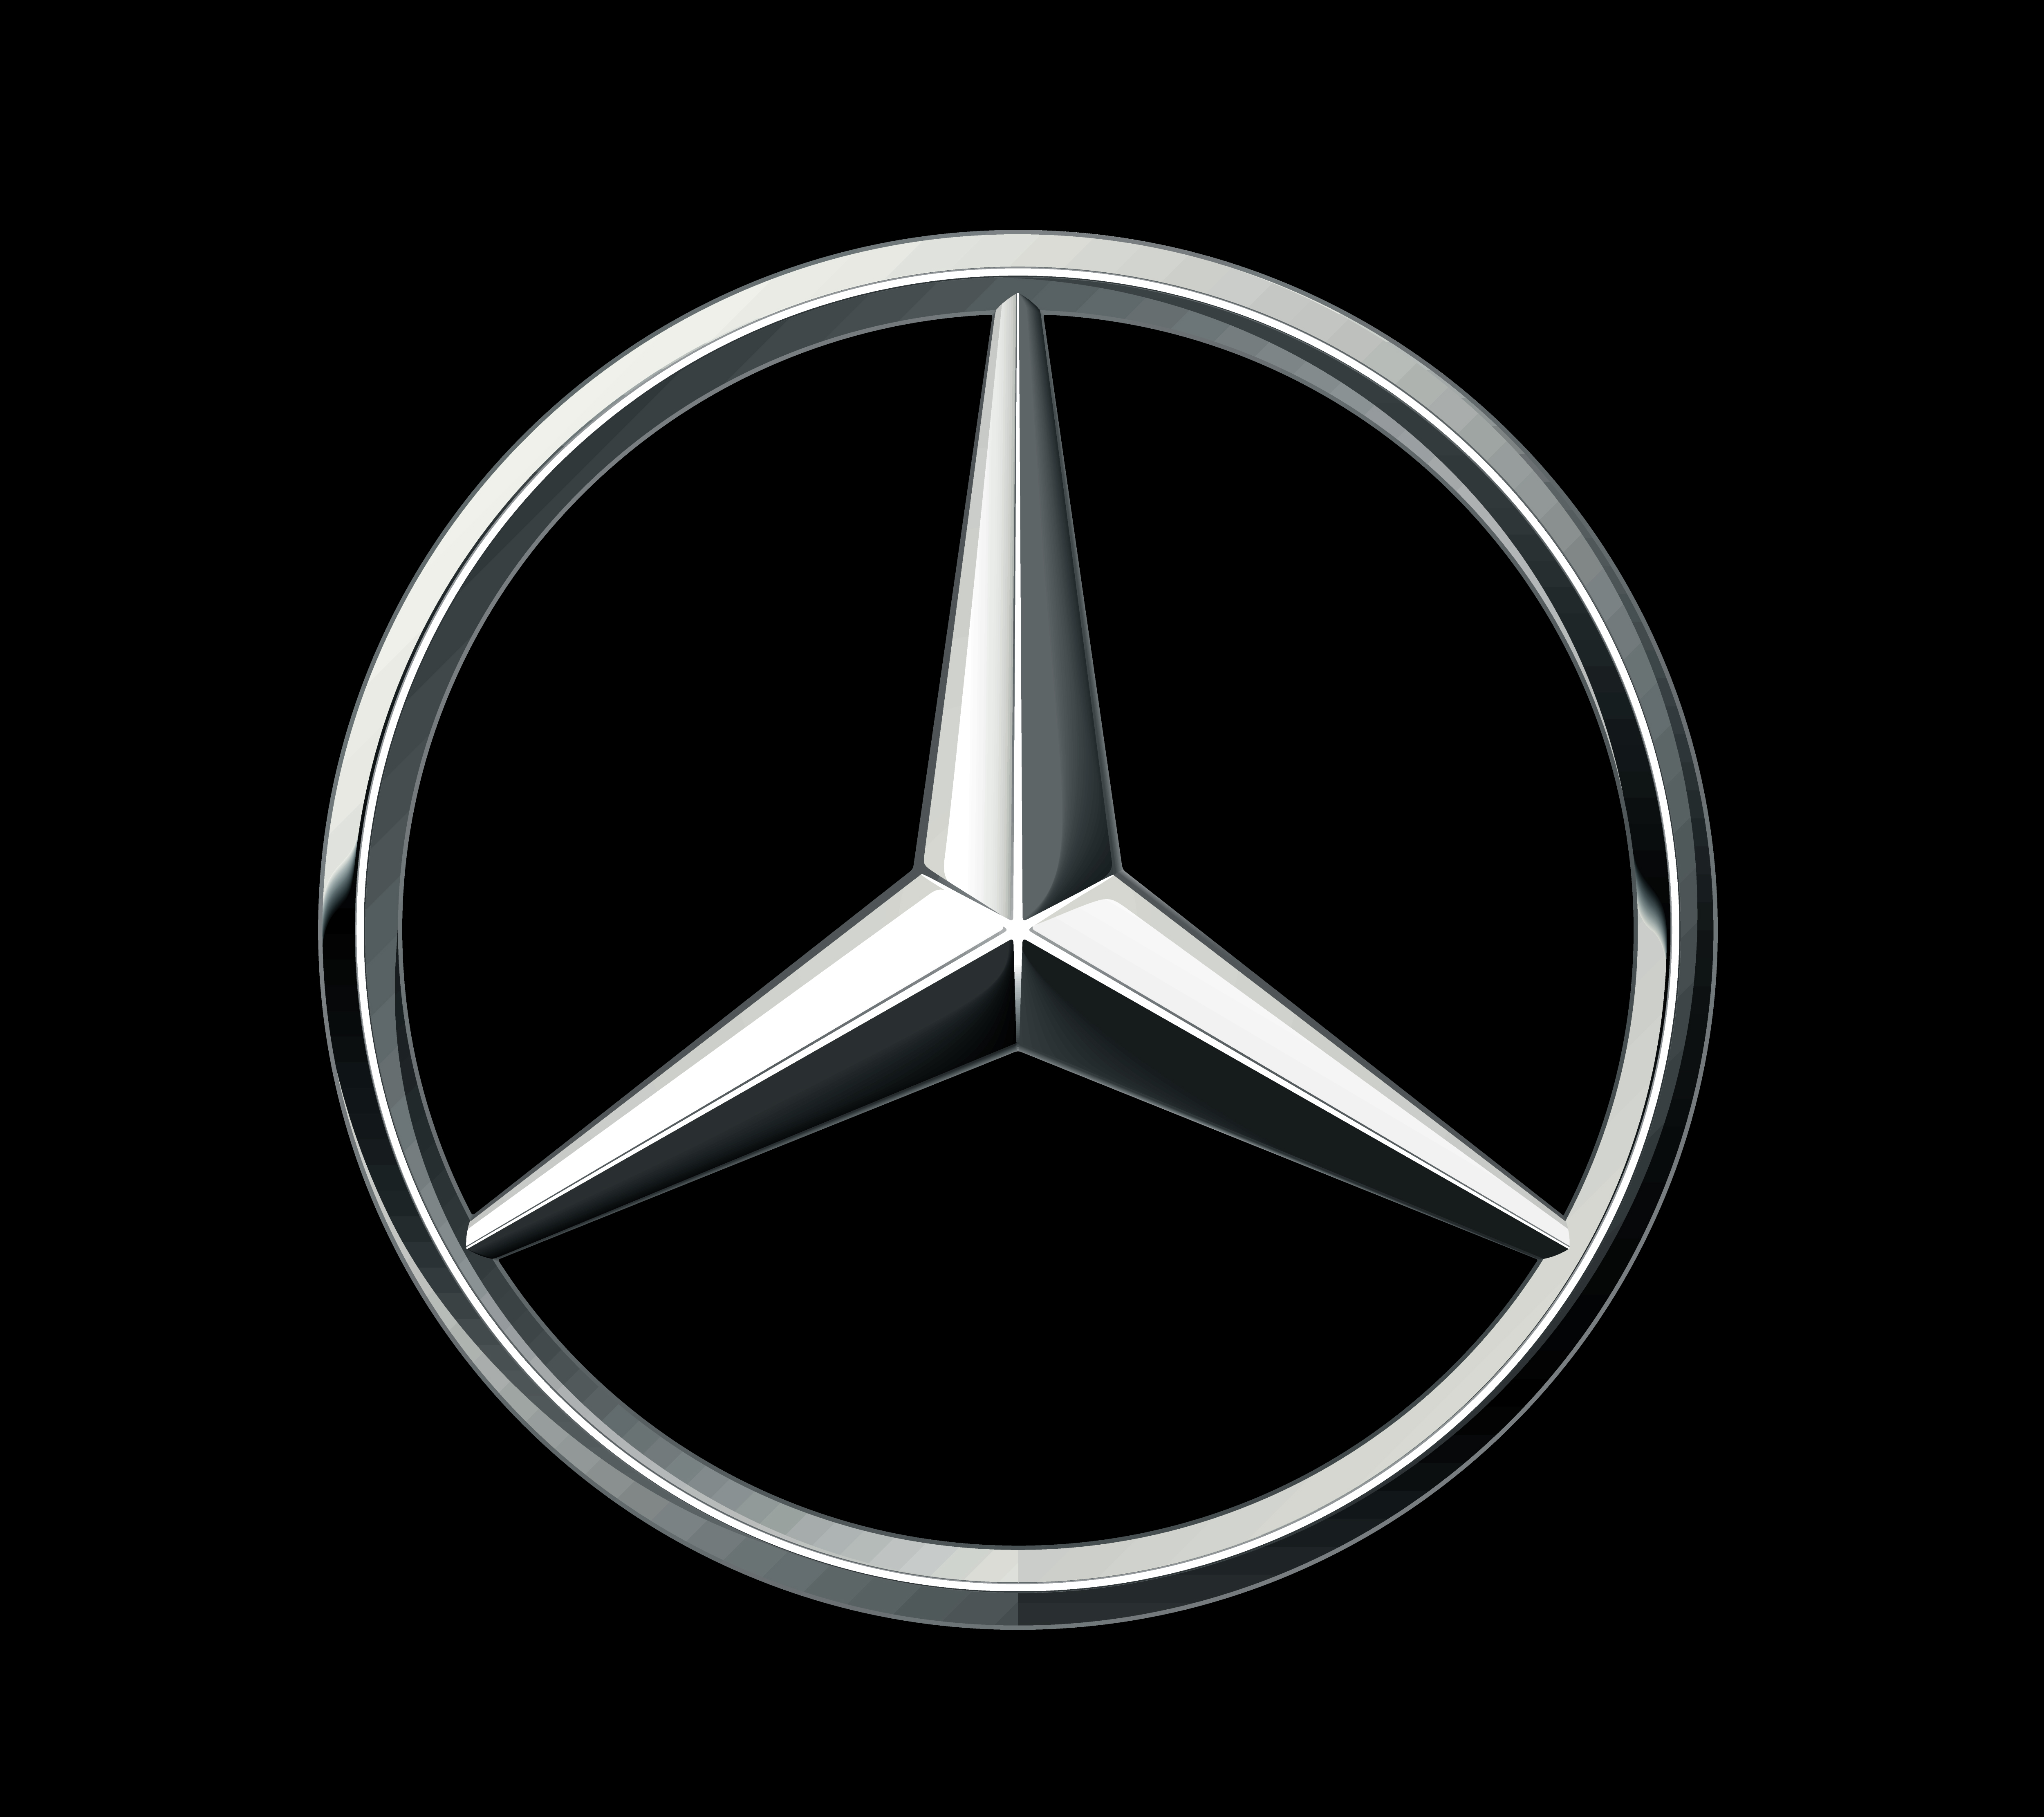 Mercedes benz symbol meaning #4